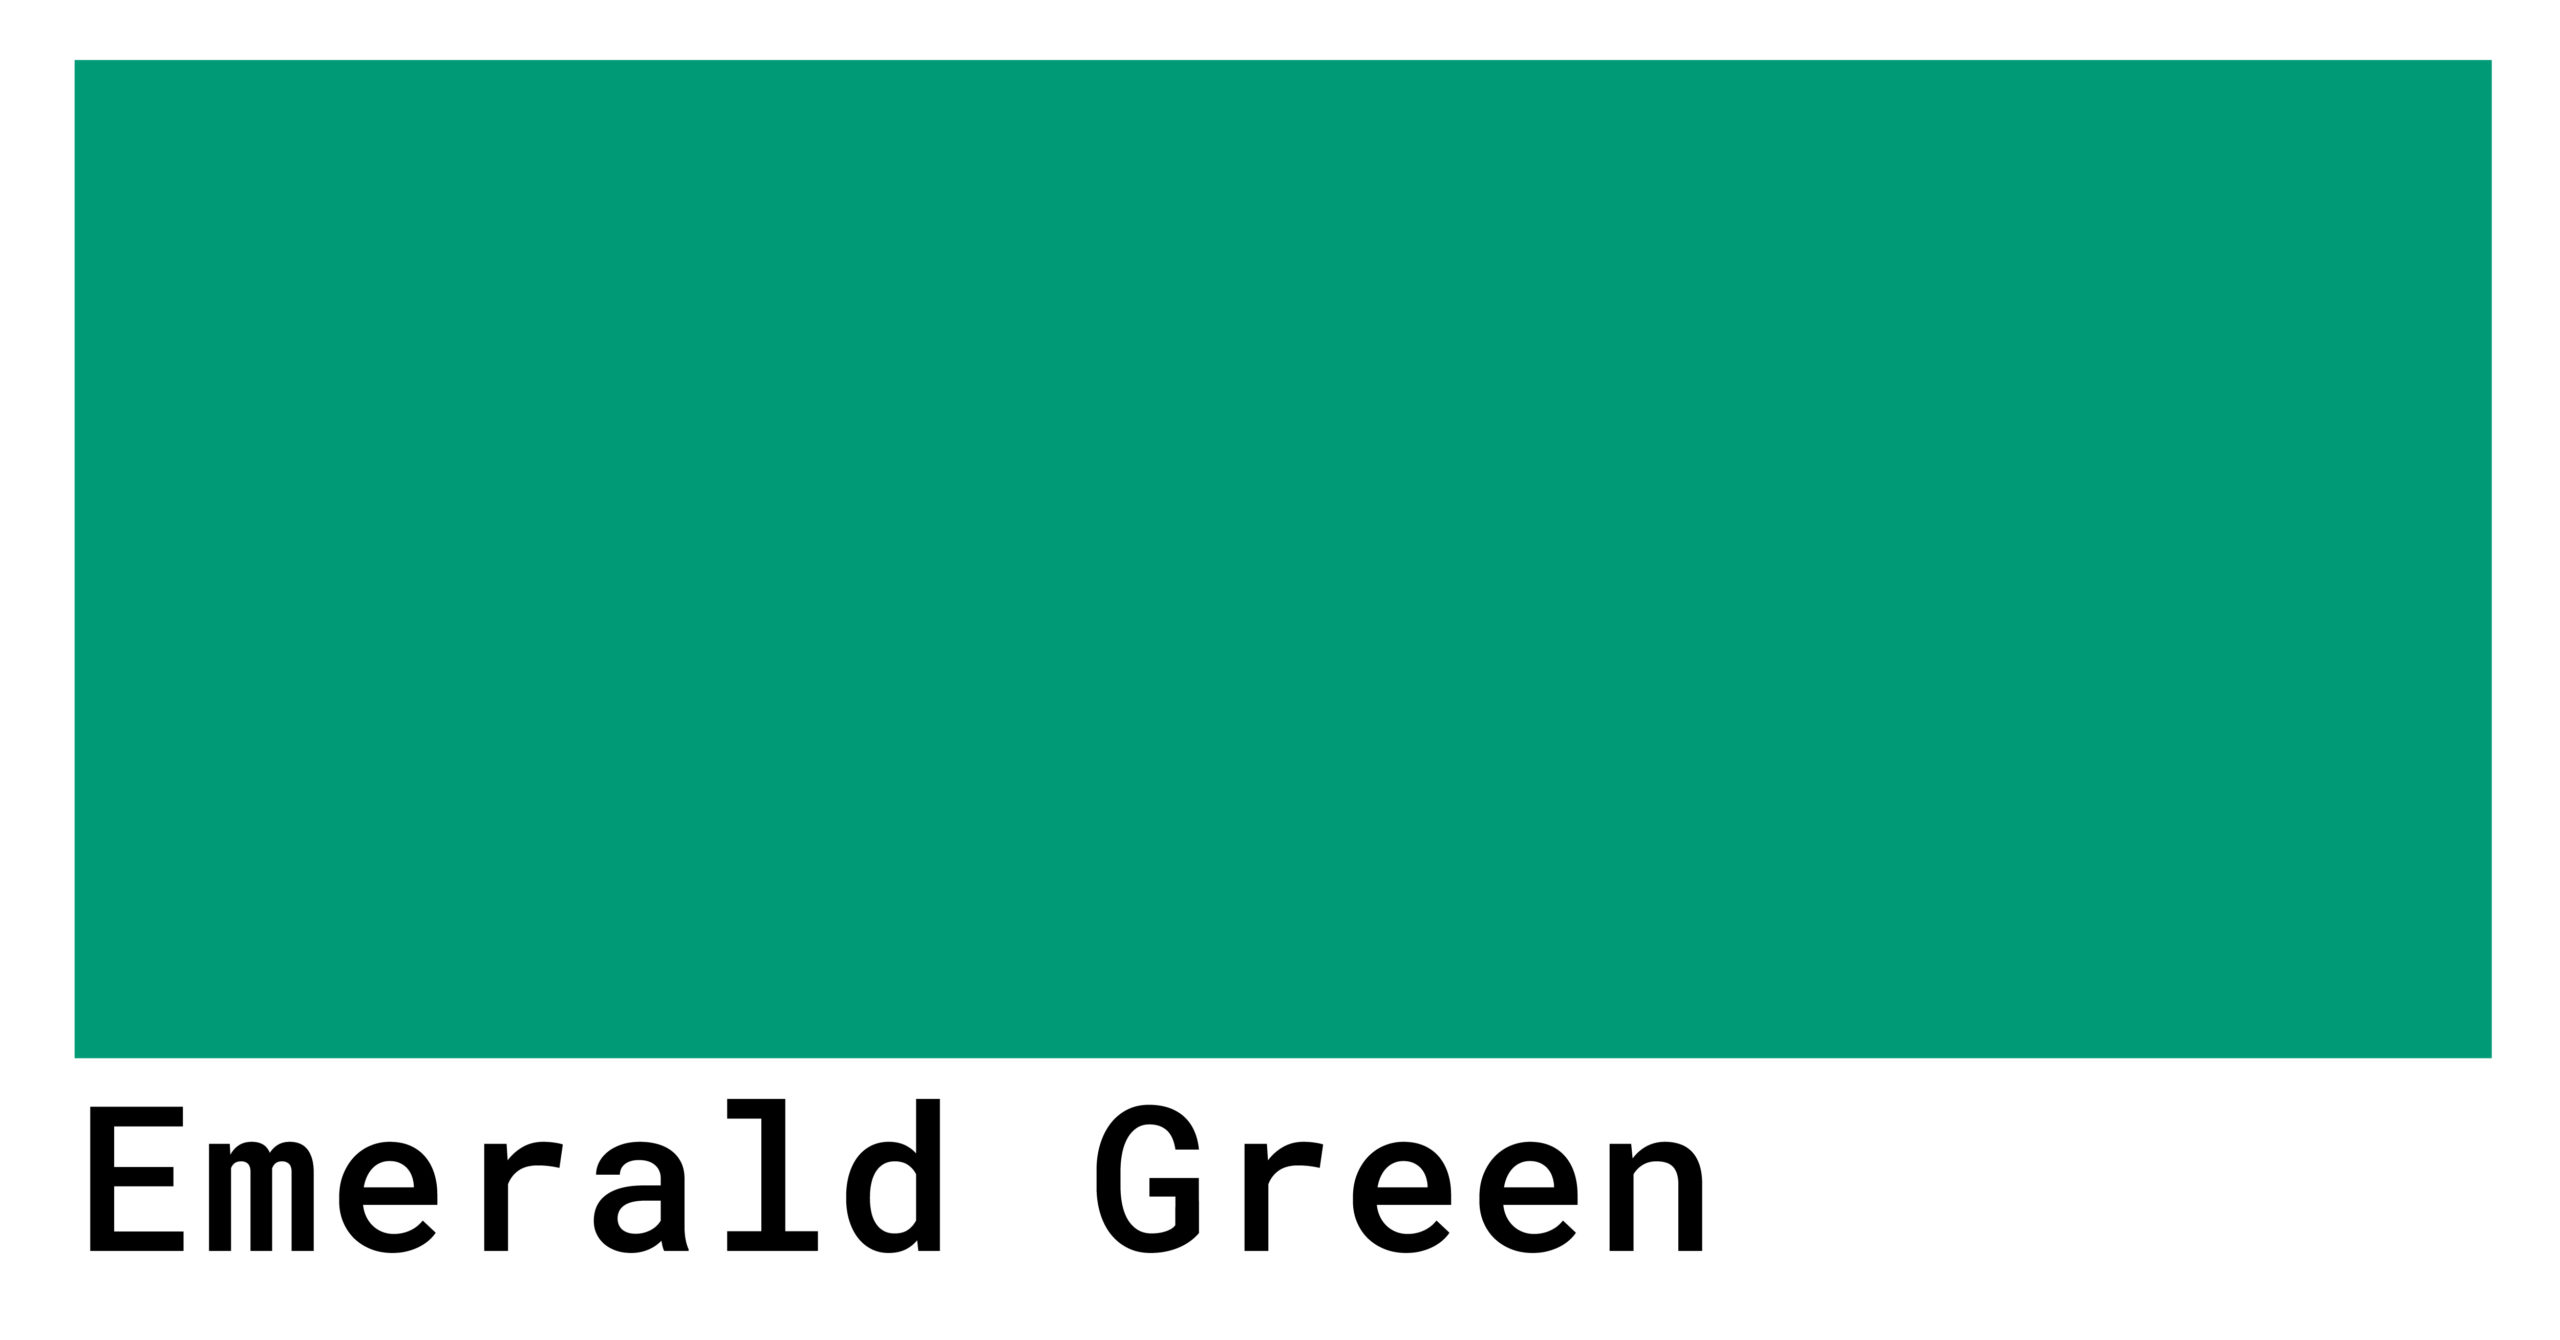 emerald green color swatch scaled